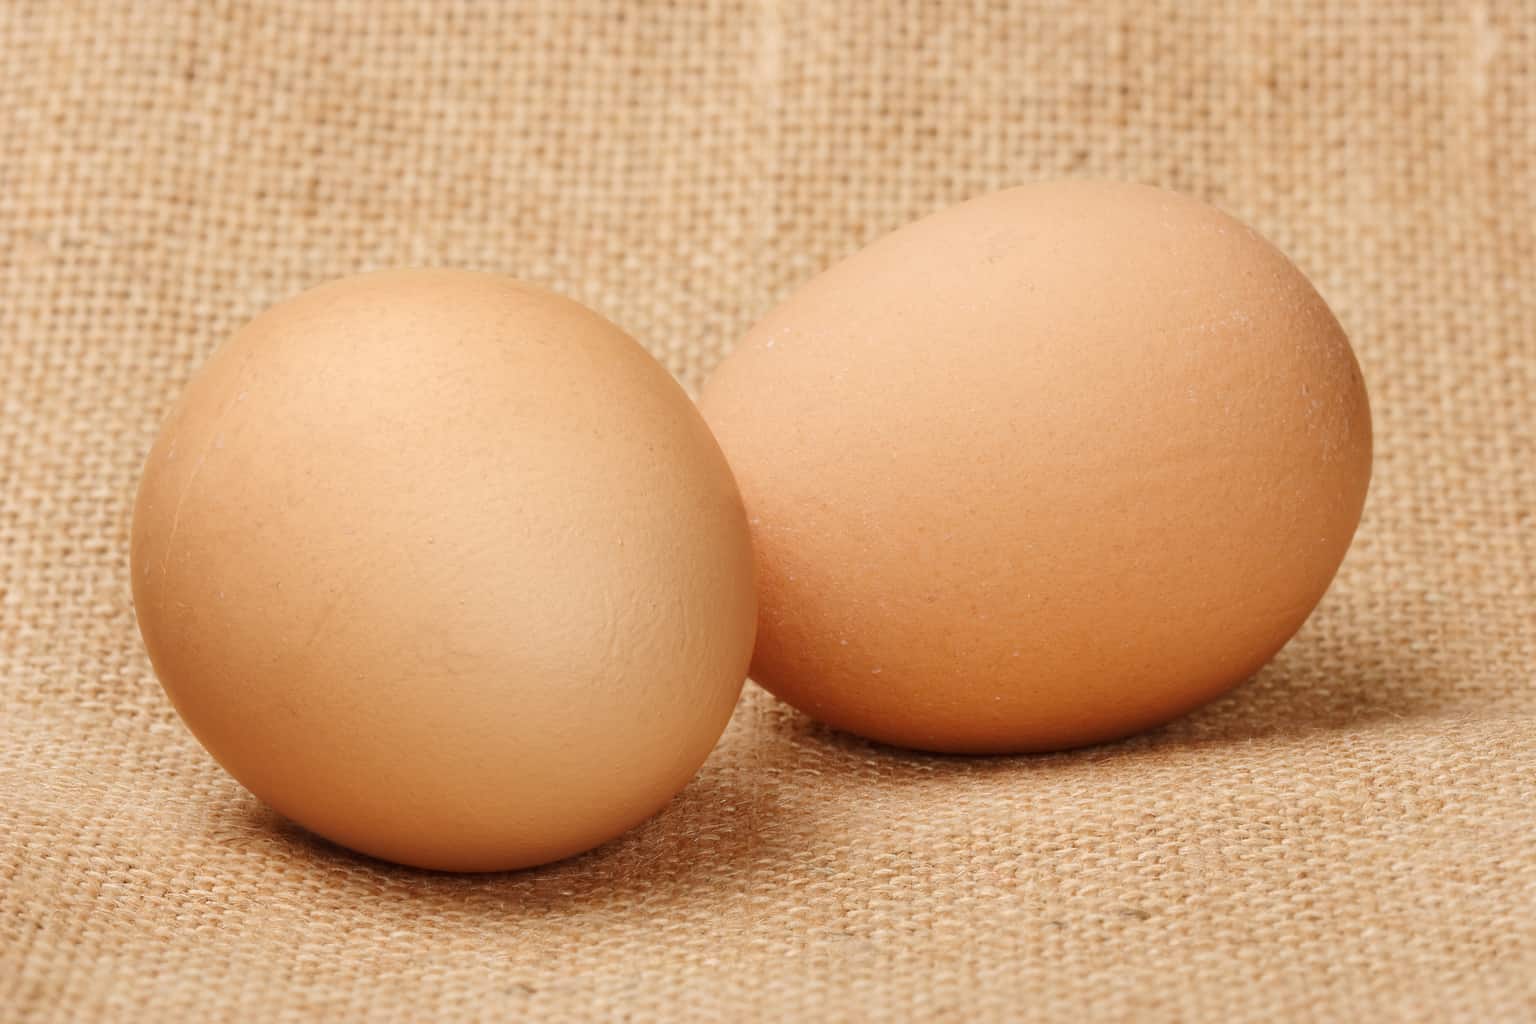 What happens when you eat 2 eggs a day?